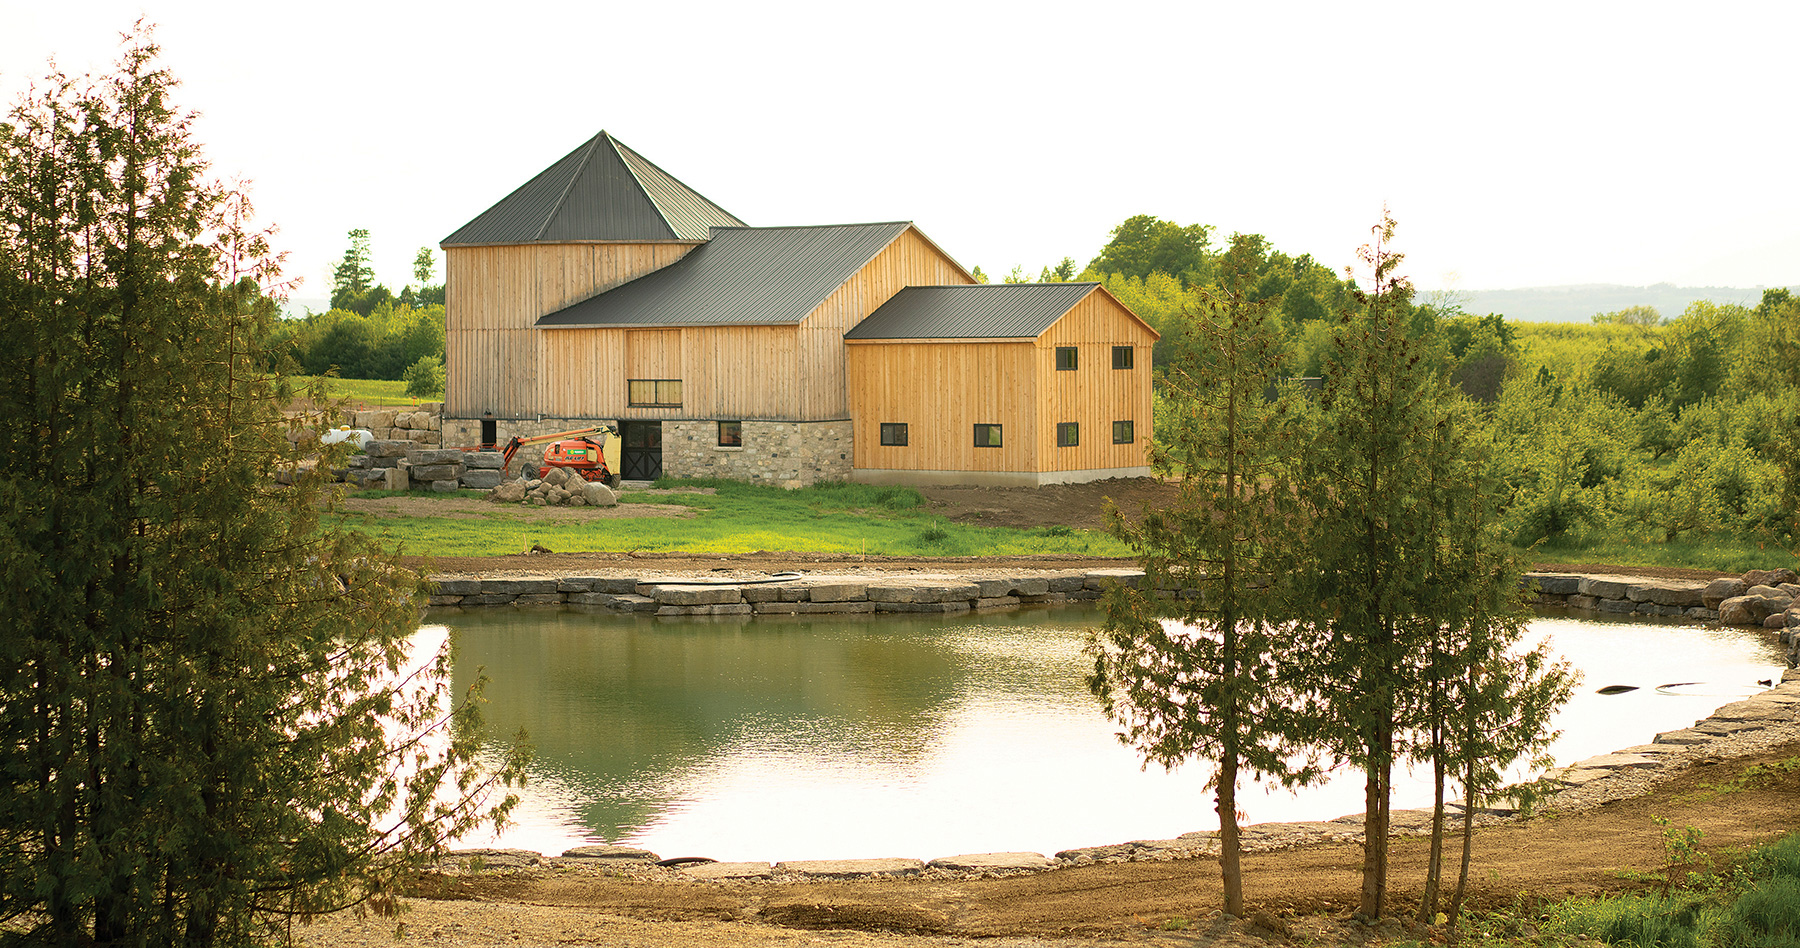 Some old barns are extensively transformed with modern amenities and technology. 